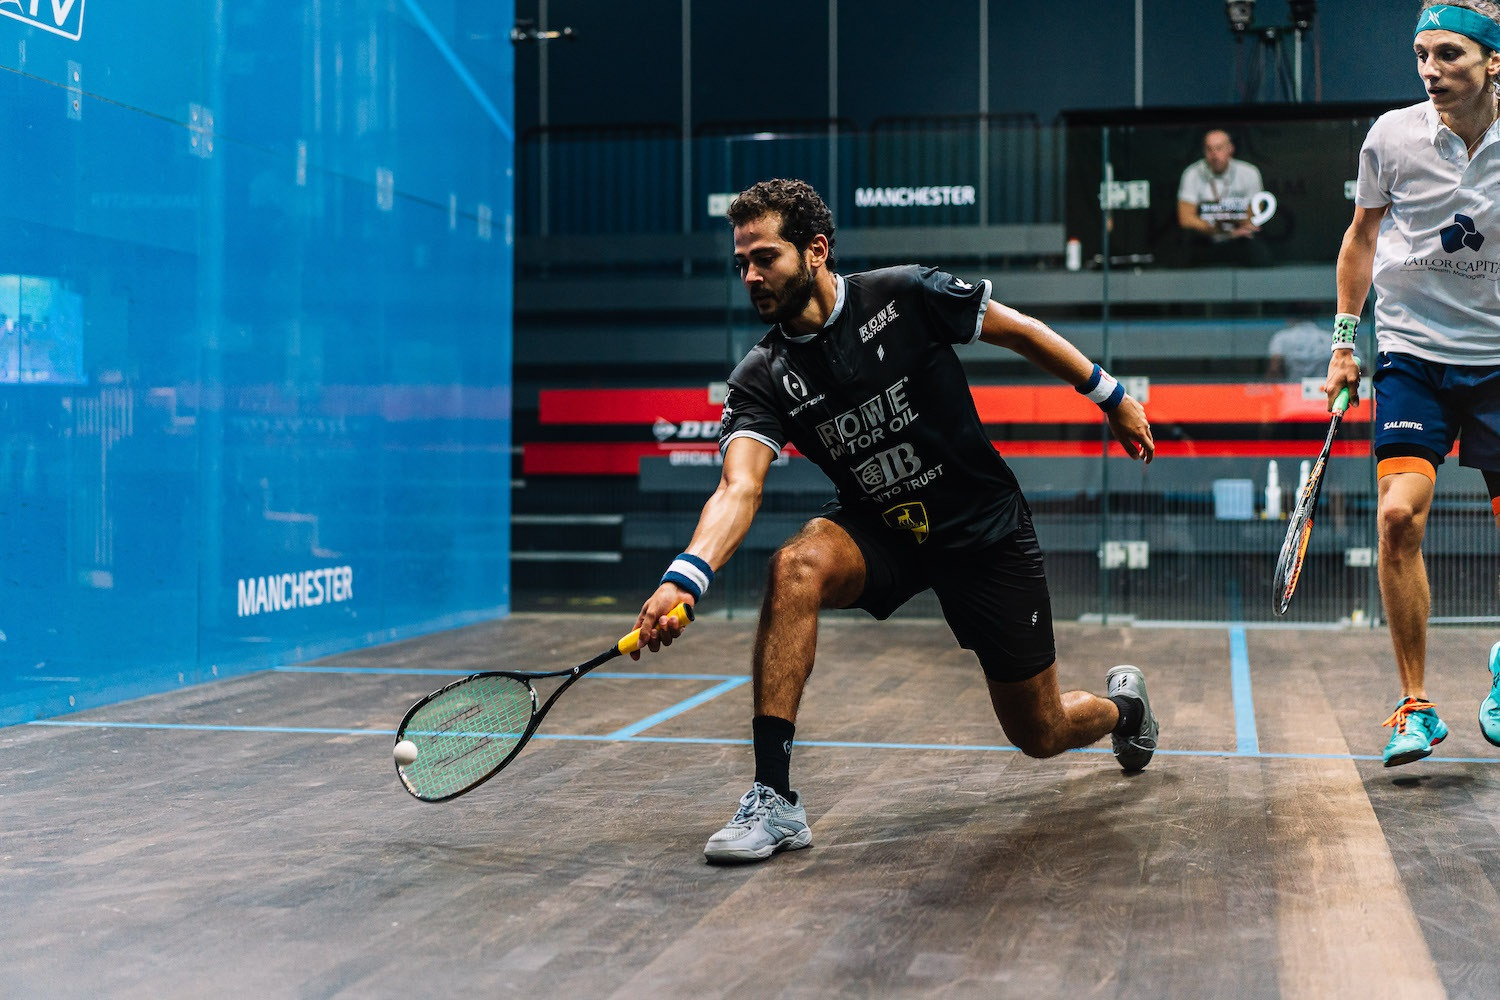 World number three Gawad survives scare in round one of PSA Manchester Open